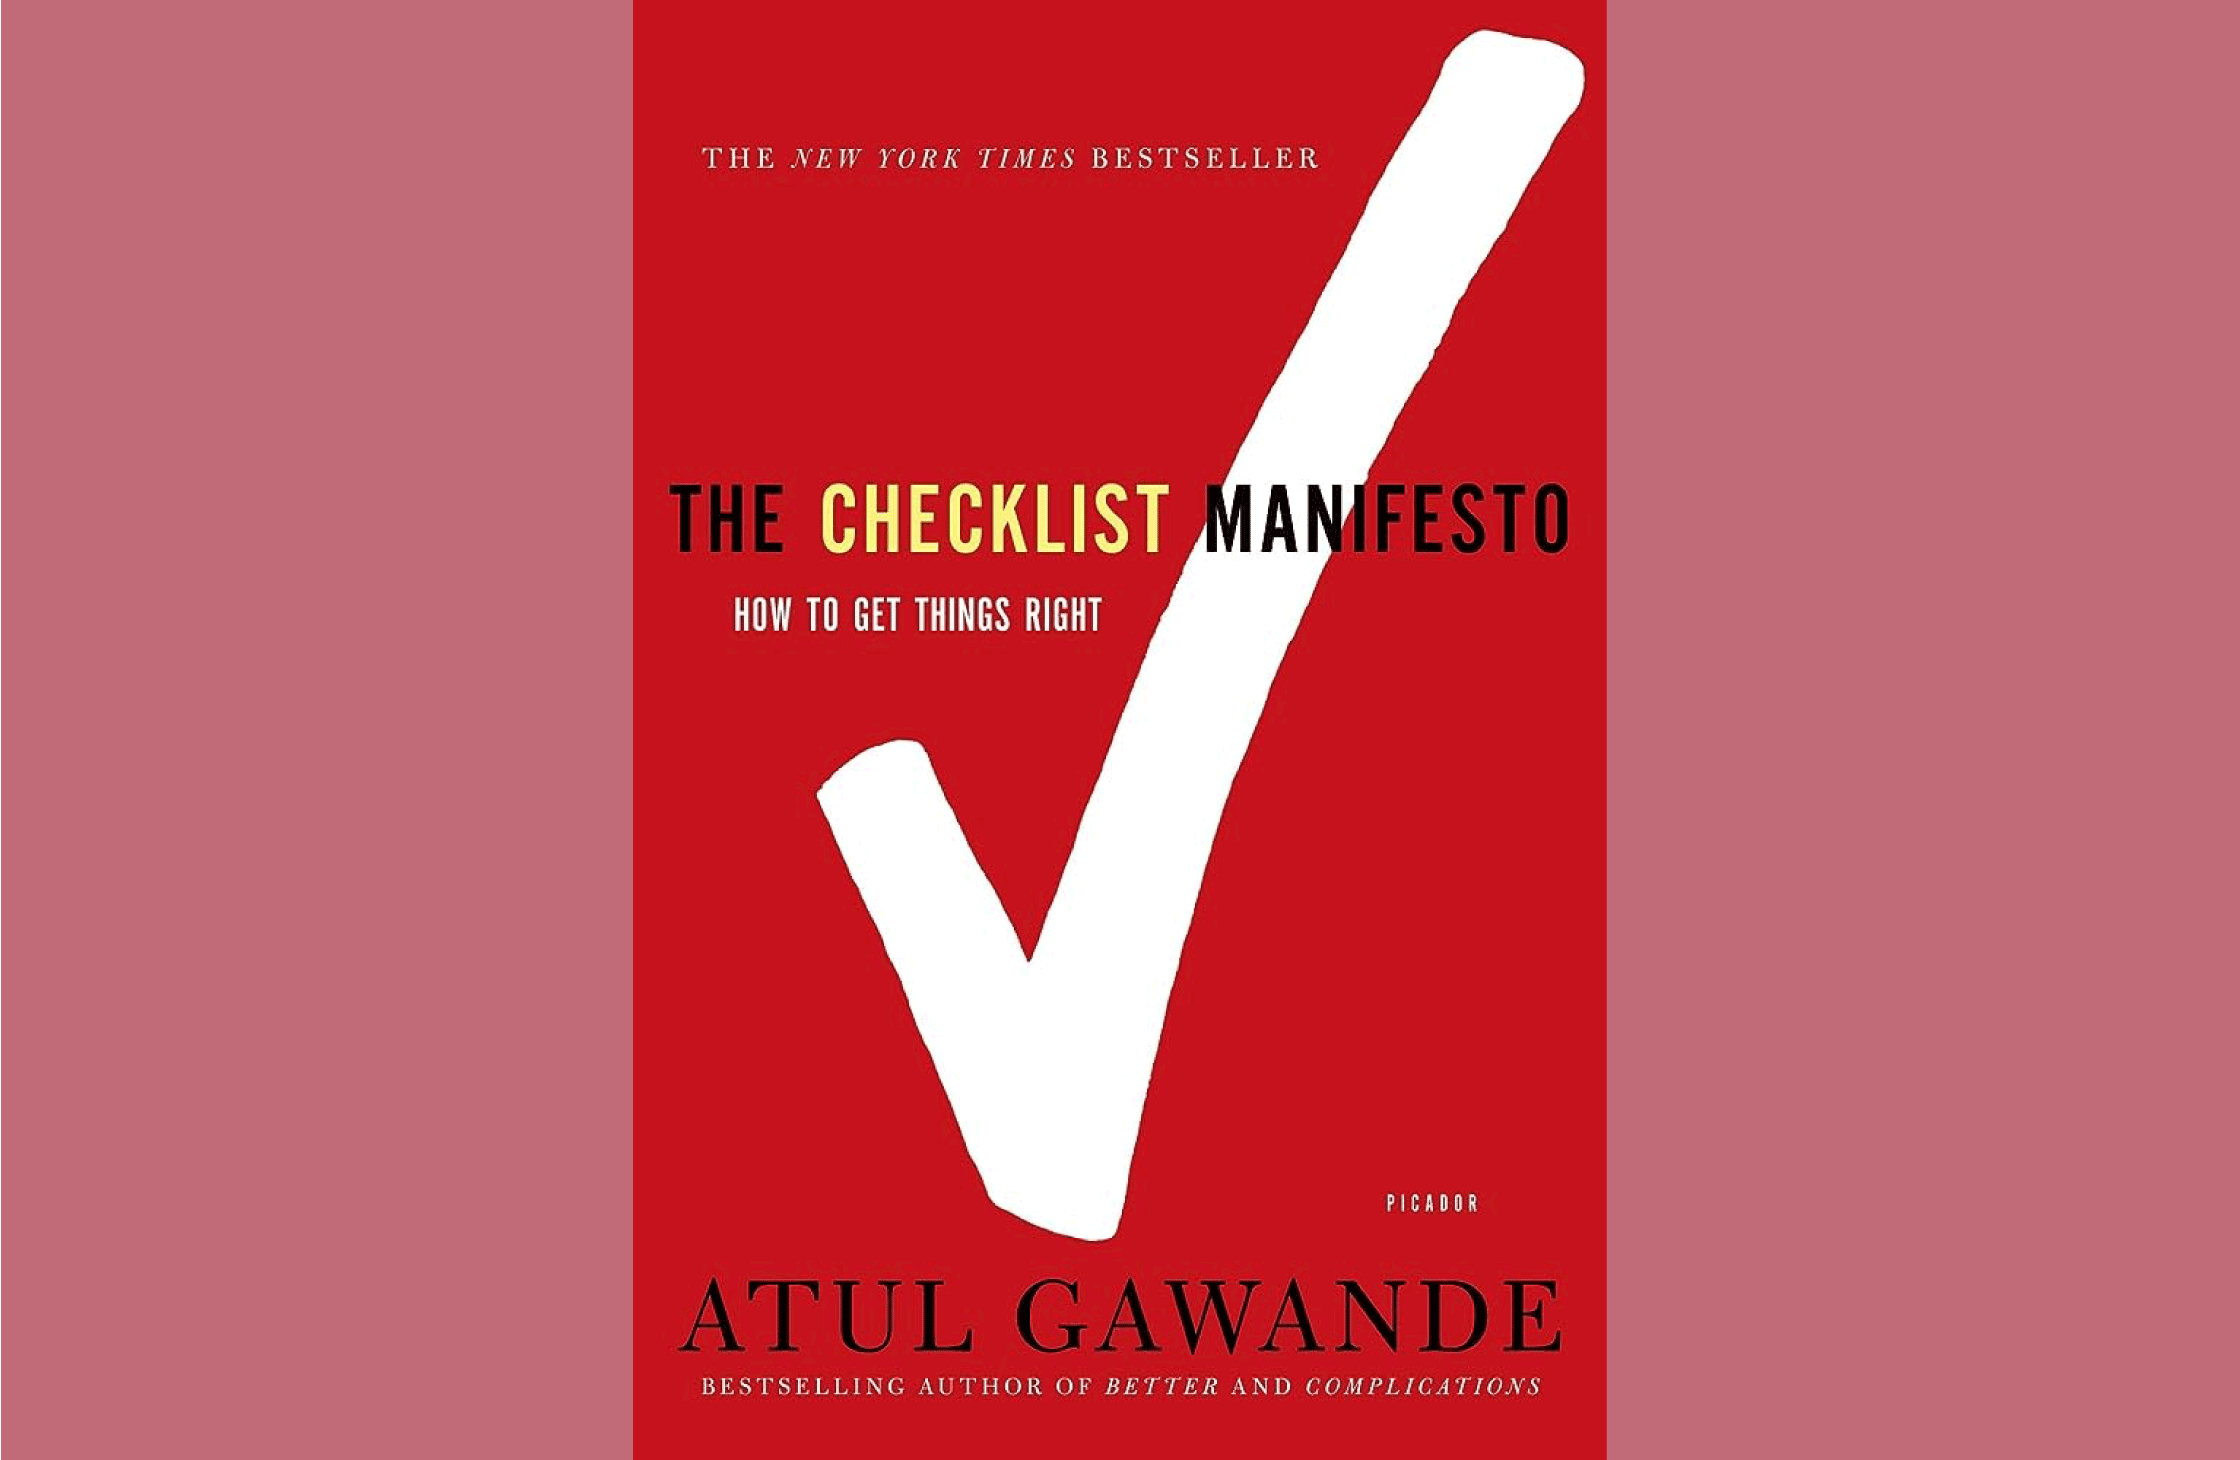 Summary: The Checklist Manifesto: How to Get Things Right by Atul Gawande